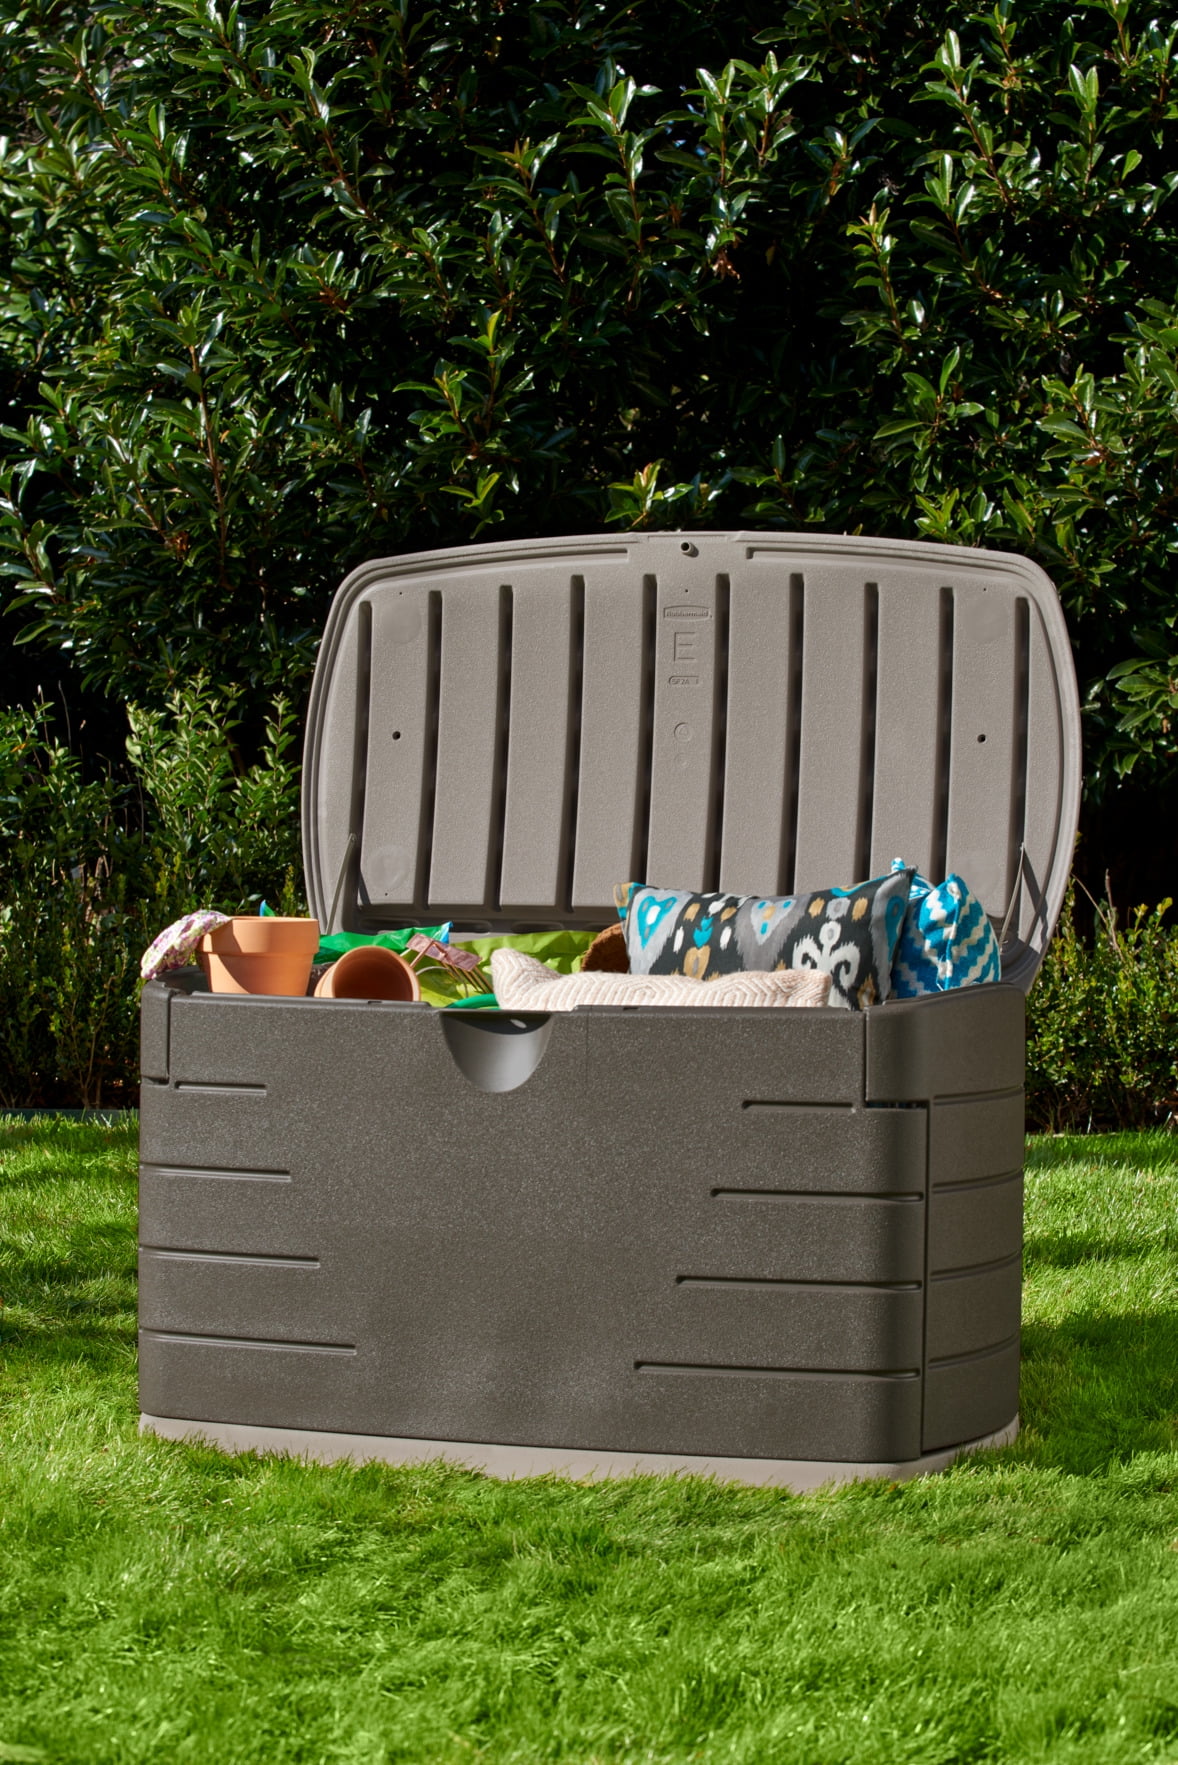 Rubbermaid 2047053 2-Foot X 3-Foot 6-Inch Olive & Sandstone Resin Deck Box  With Seat at Sutherlands